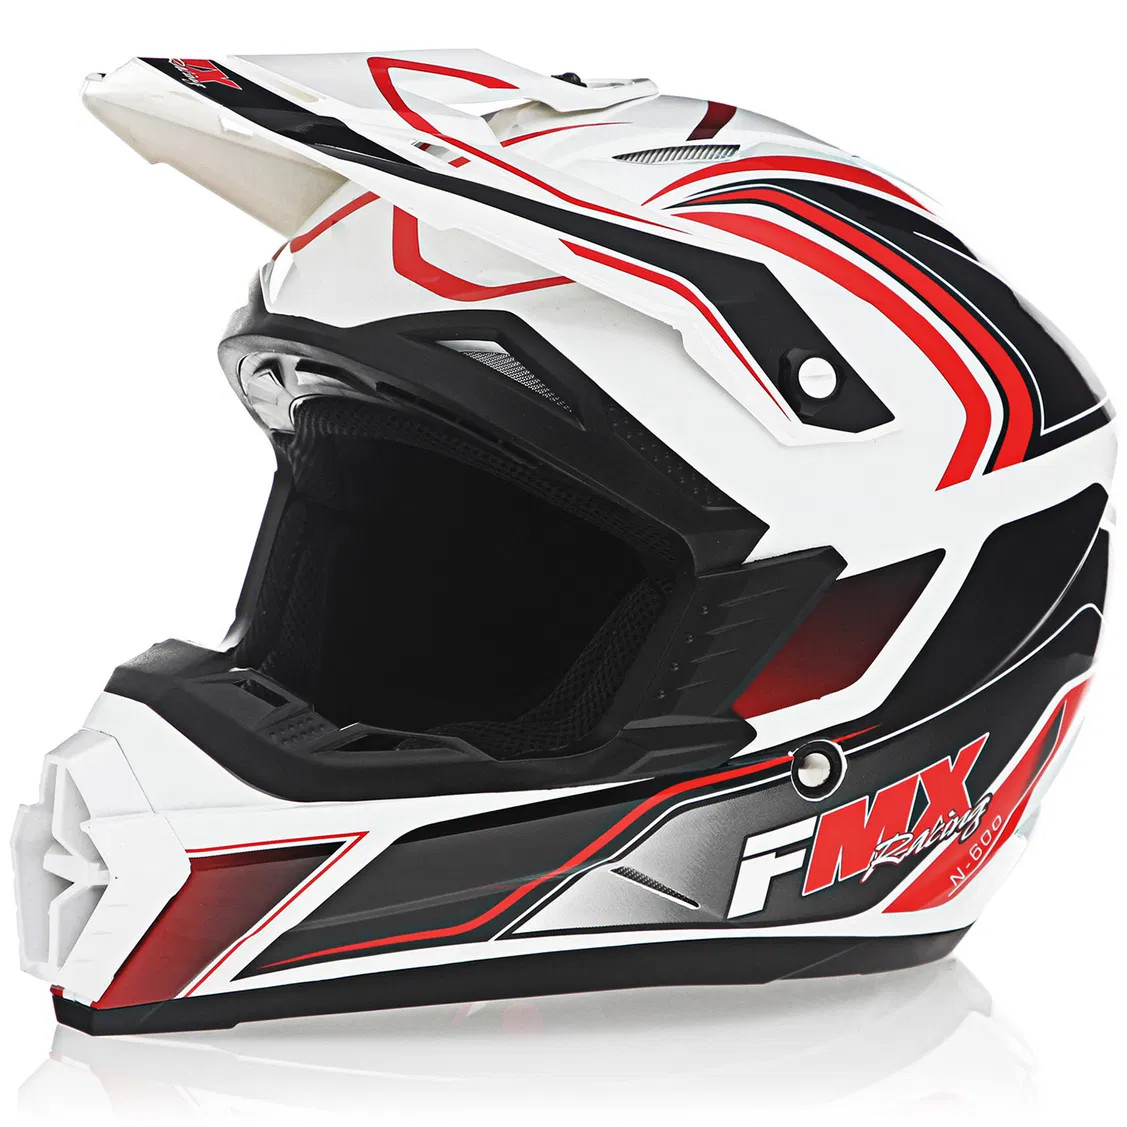 FMX N-600 2X-Large Motocross Helmet, White & Red, Double D Closure, DOT Approved - Click Image to Close